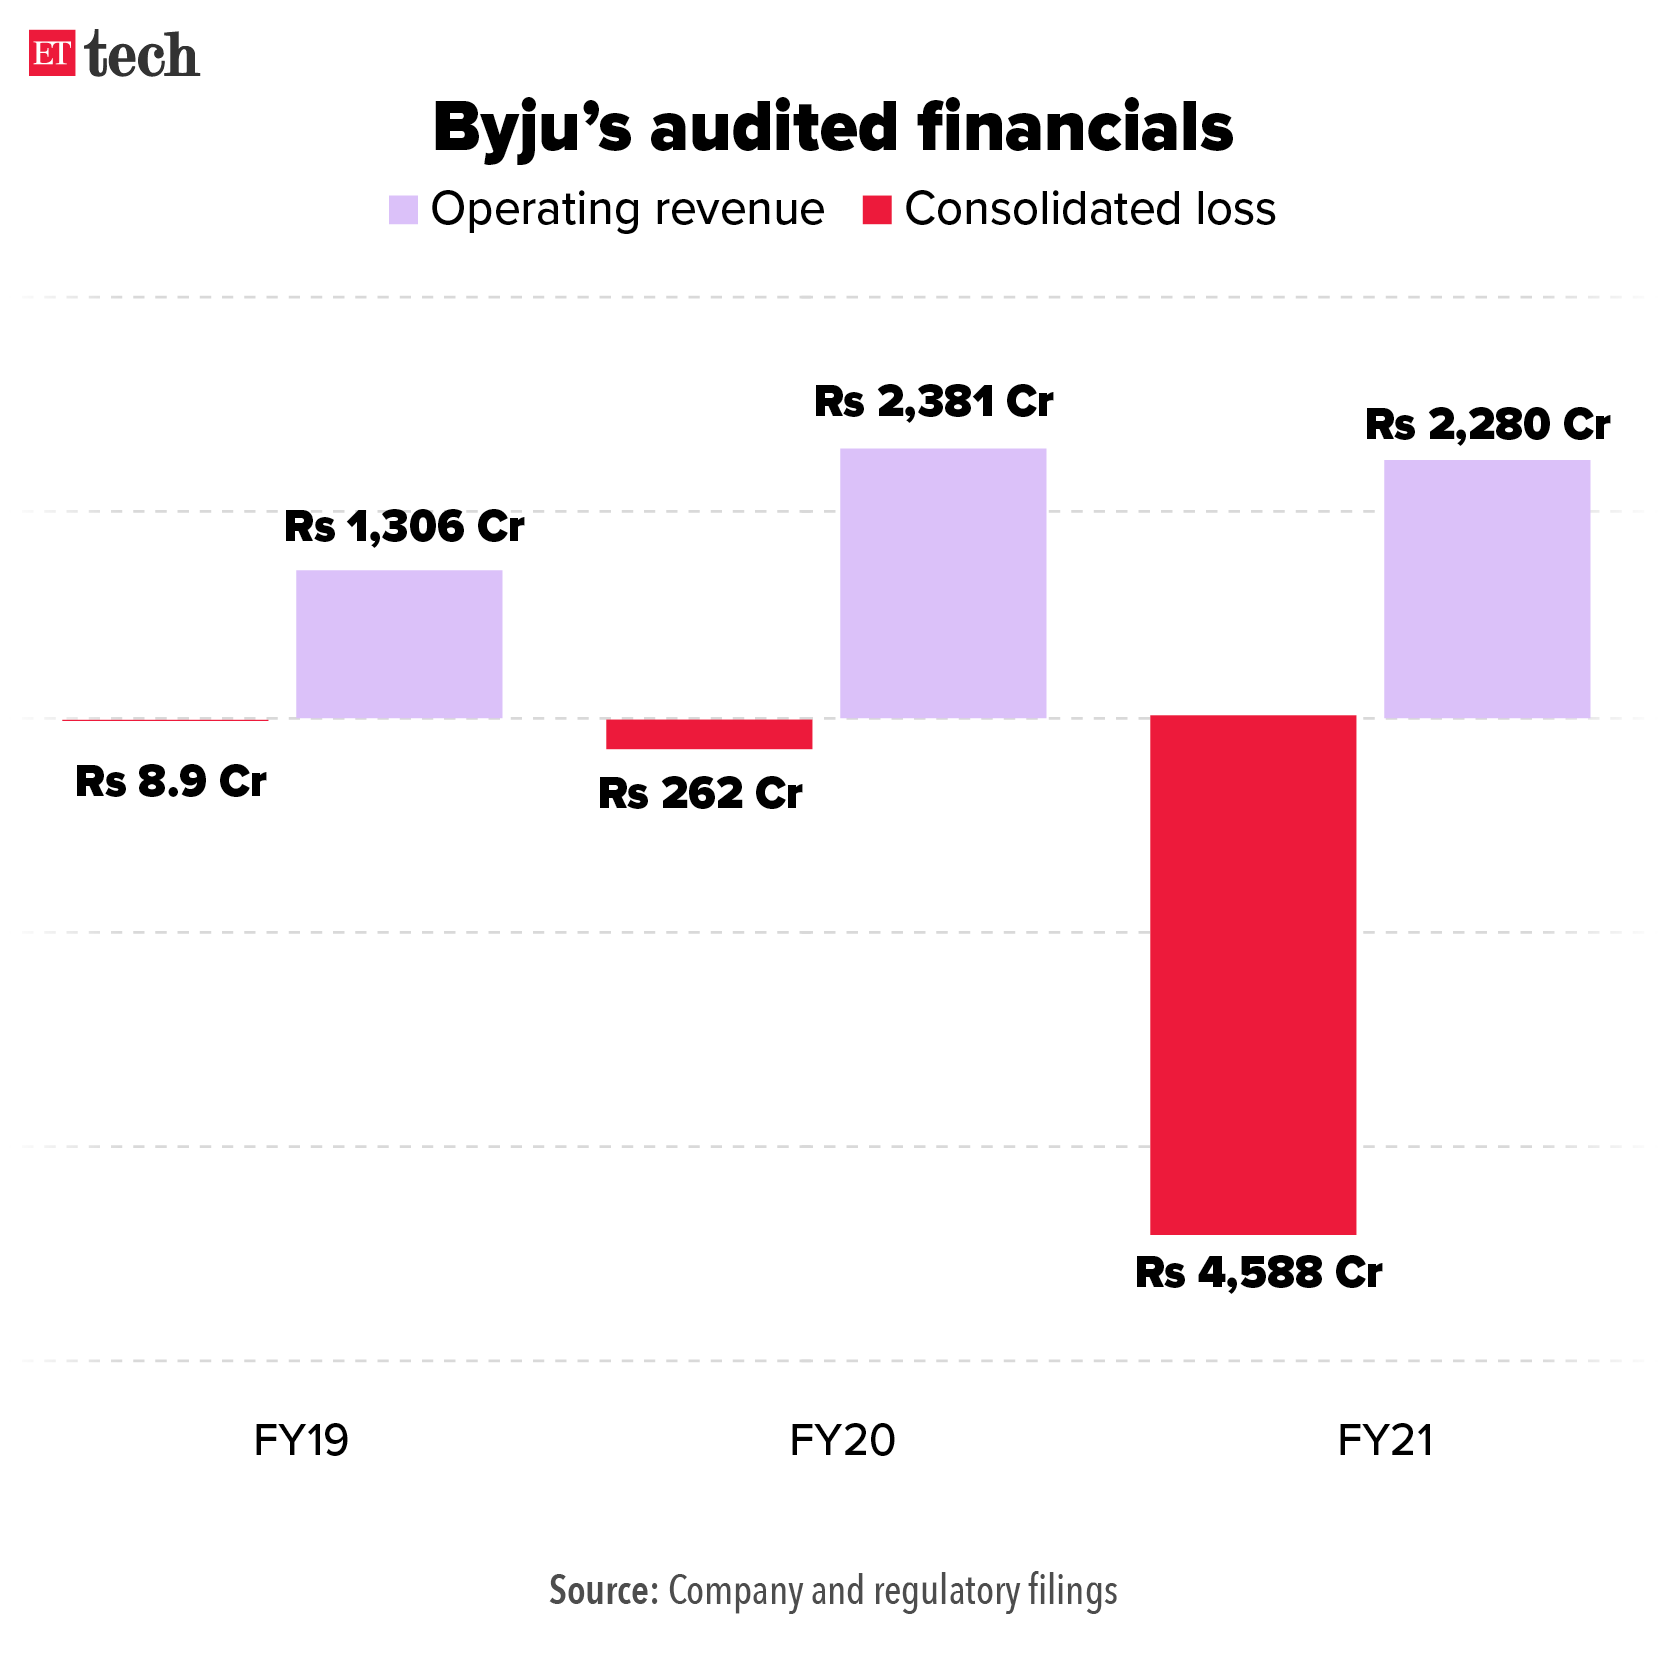 byjus revenue Byju’s losses swell to Rs 4,588 crore in delayed FY21